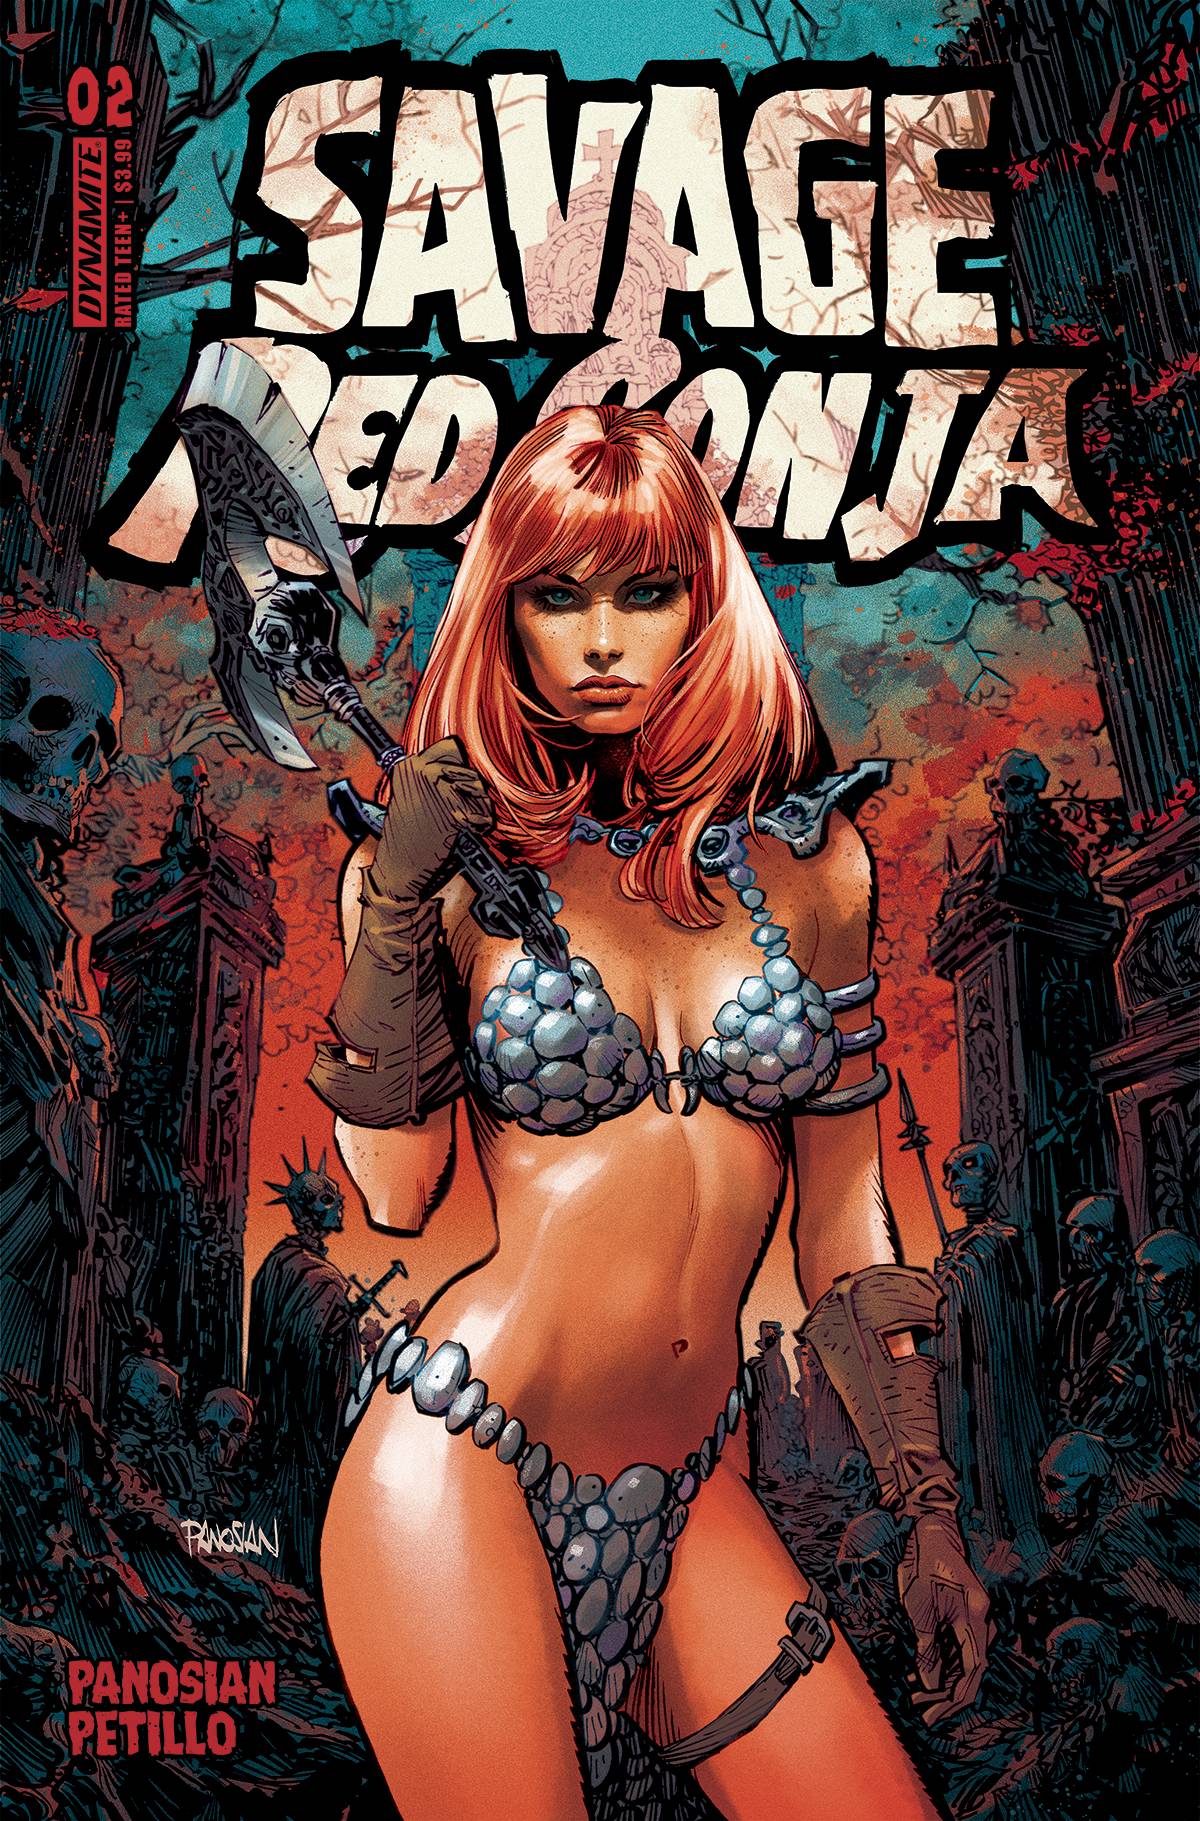 Savage Red Sonja #2: Exclusive First-Look Preview Unveiled by Dynamite Comics! 12